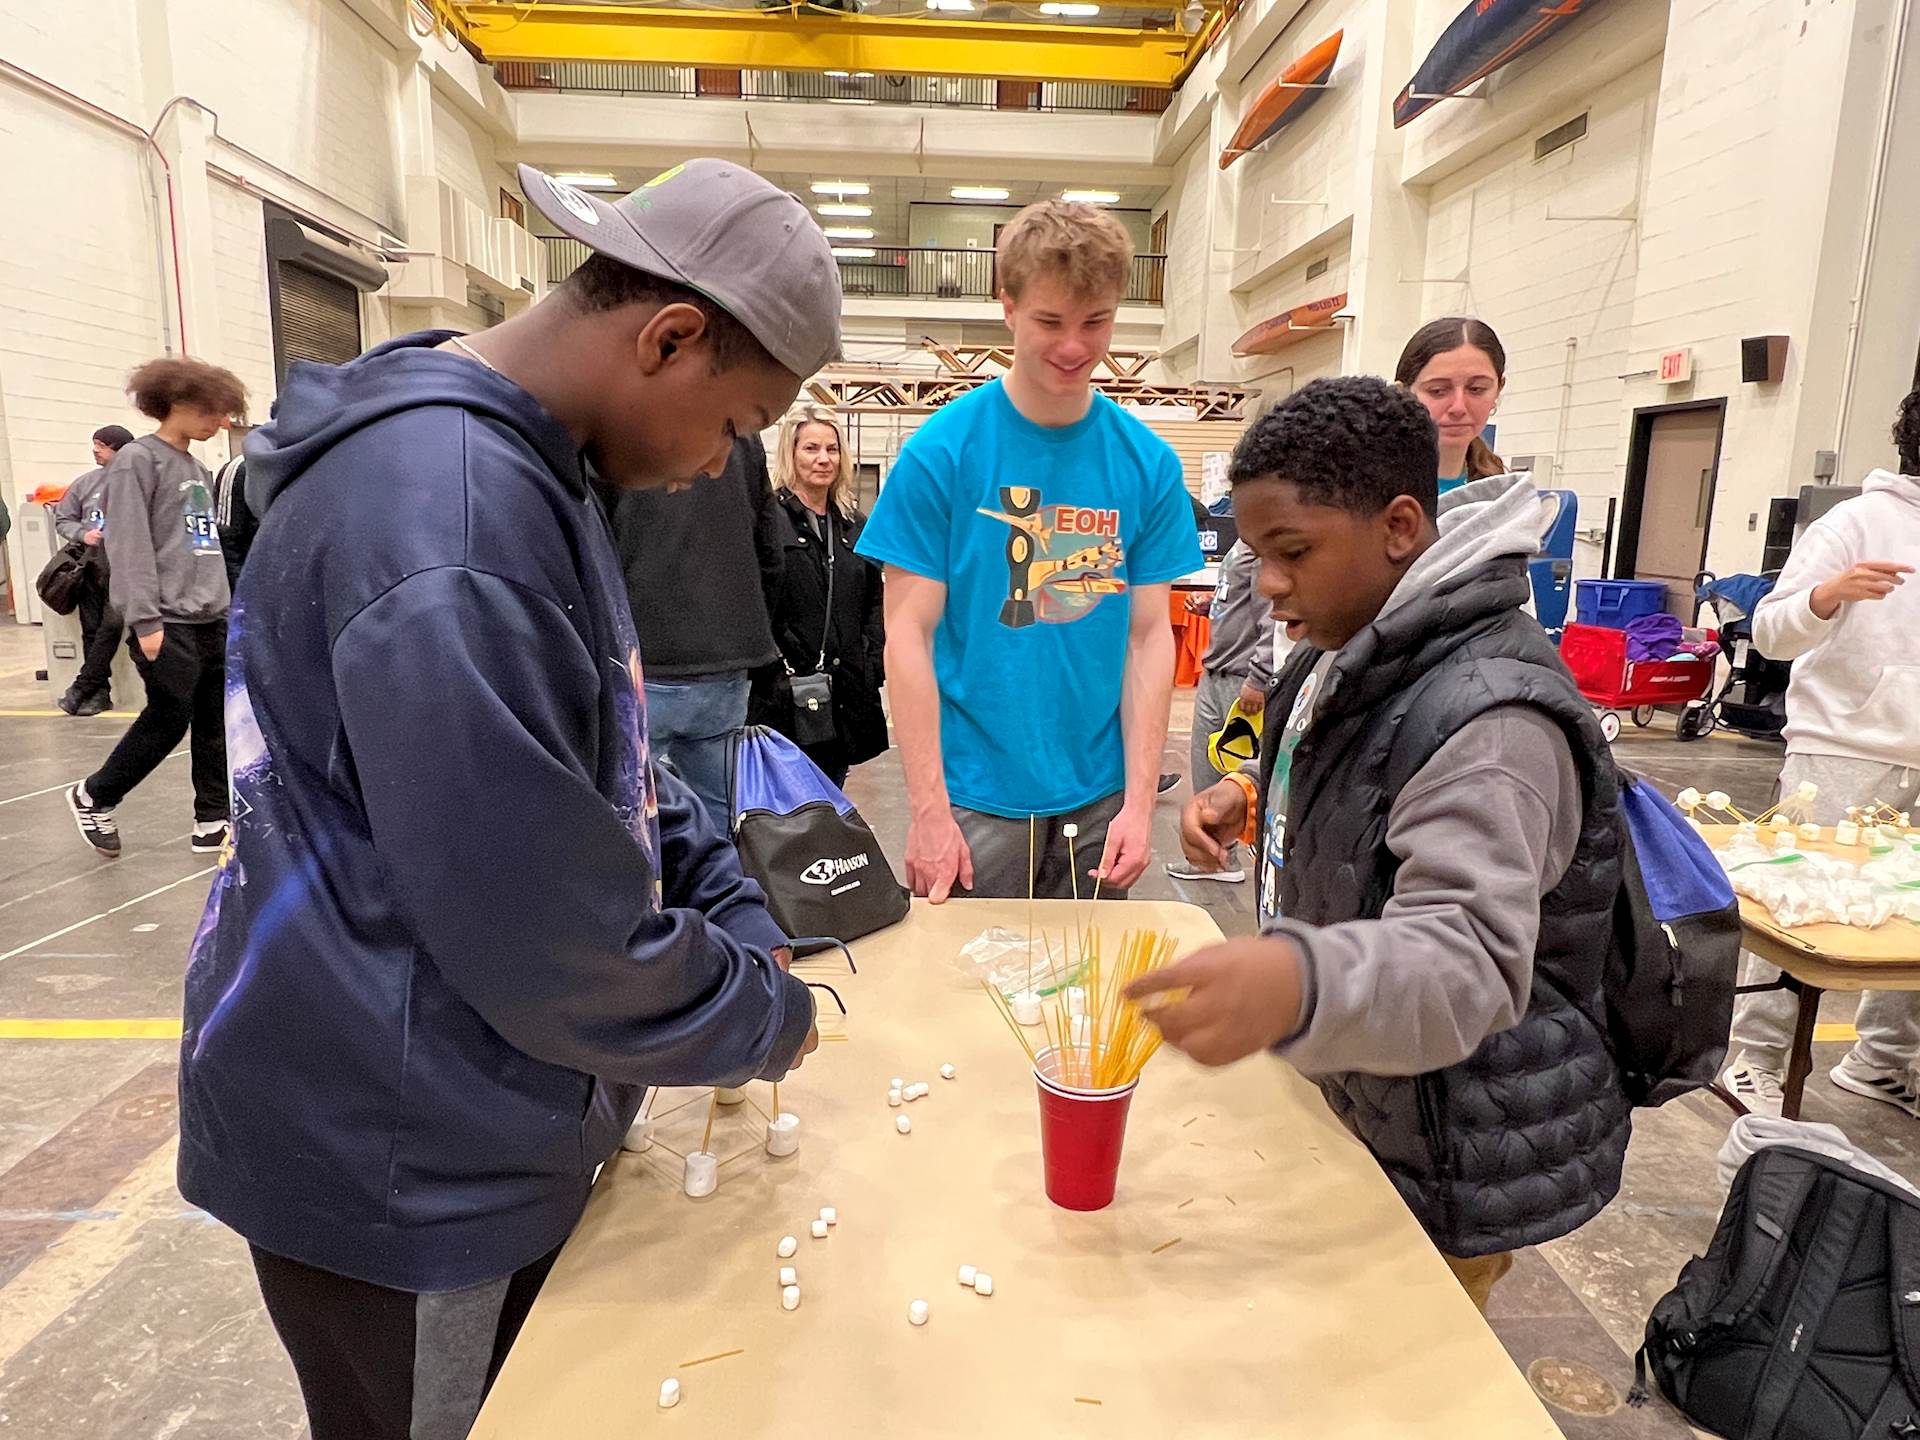 Two young students participating in a science-related activity with marshmallows and uncooked spaghetti noodles.